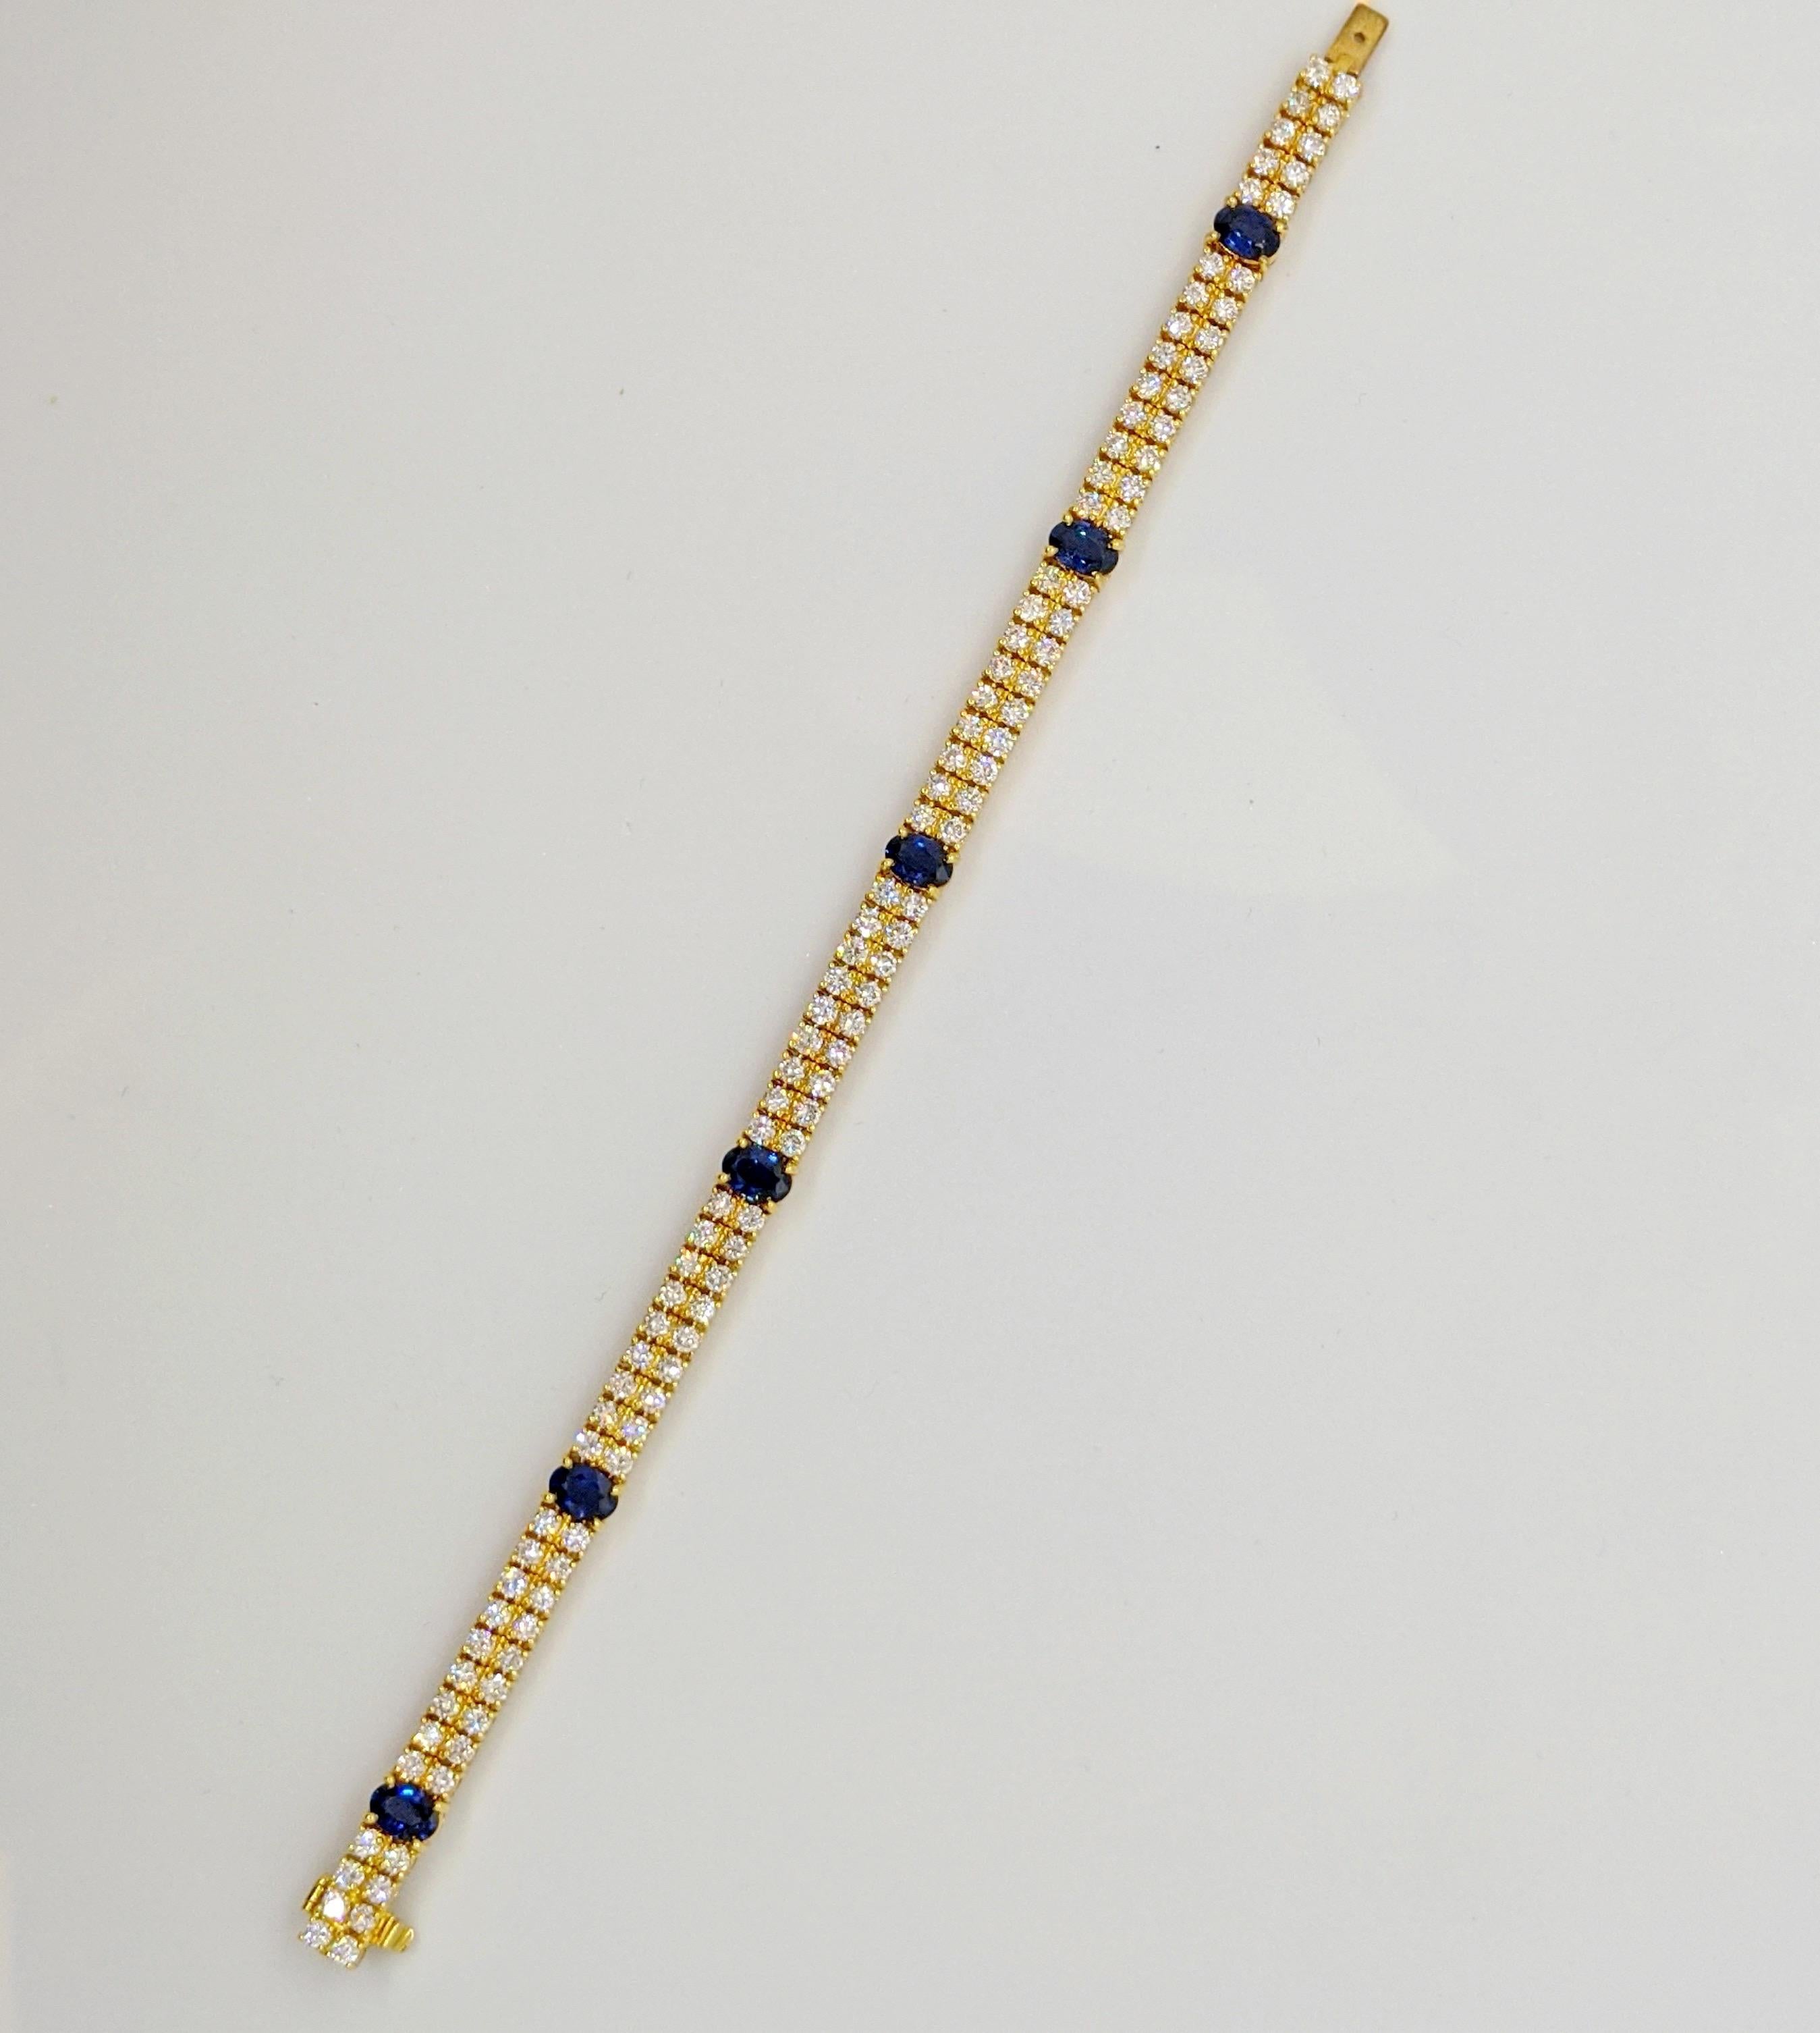 This is a beautiful classic diamond and sapphire bracelet. Set in 18 karat yellow god the bracelet features 2 rows of round brilliant diamonds. There are 6 oval blue sapphires evenly spaced throughout. The bracelet measures 7